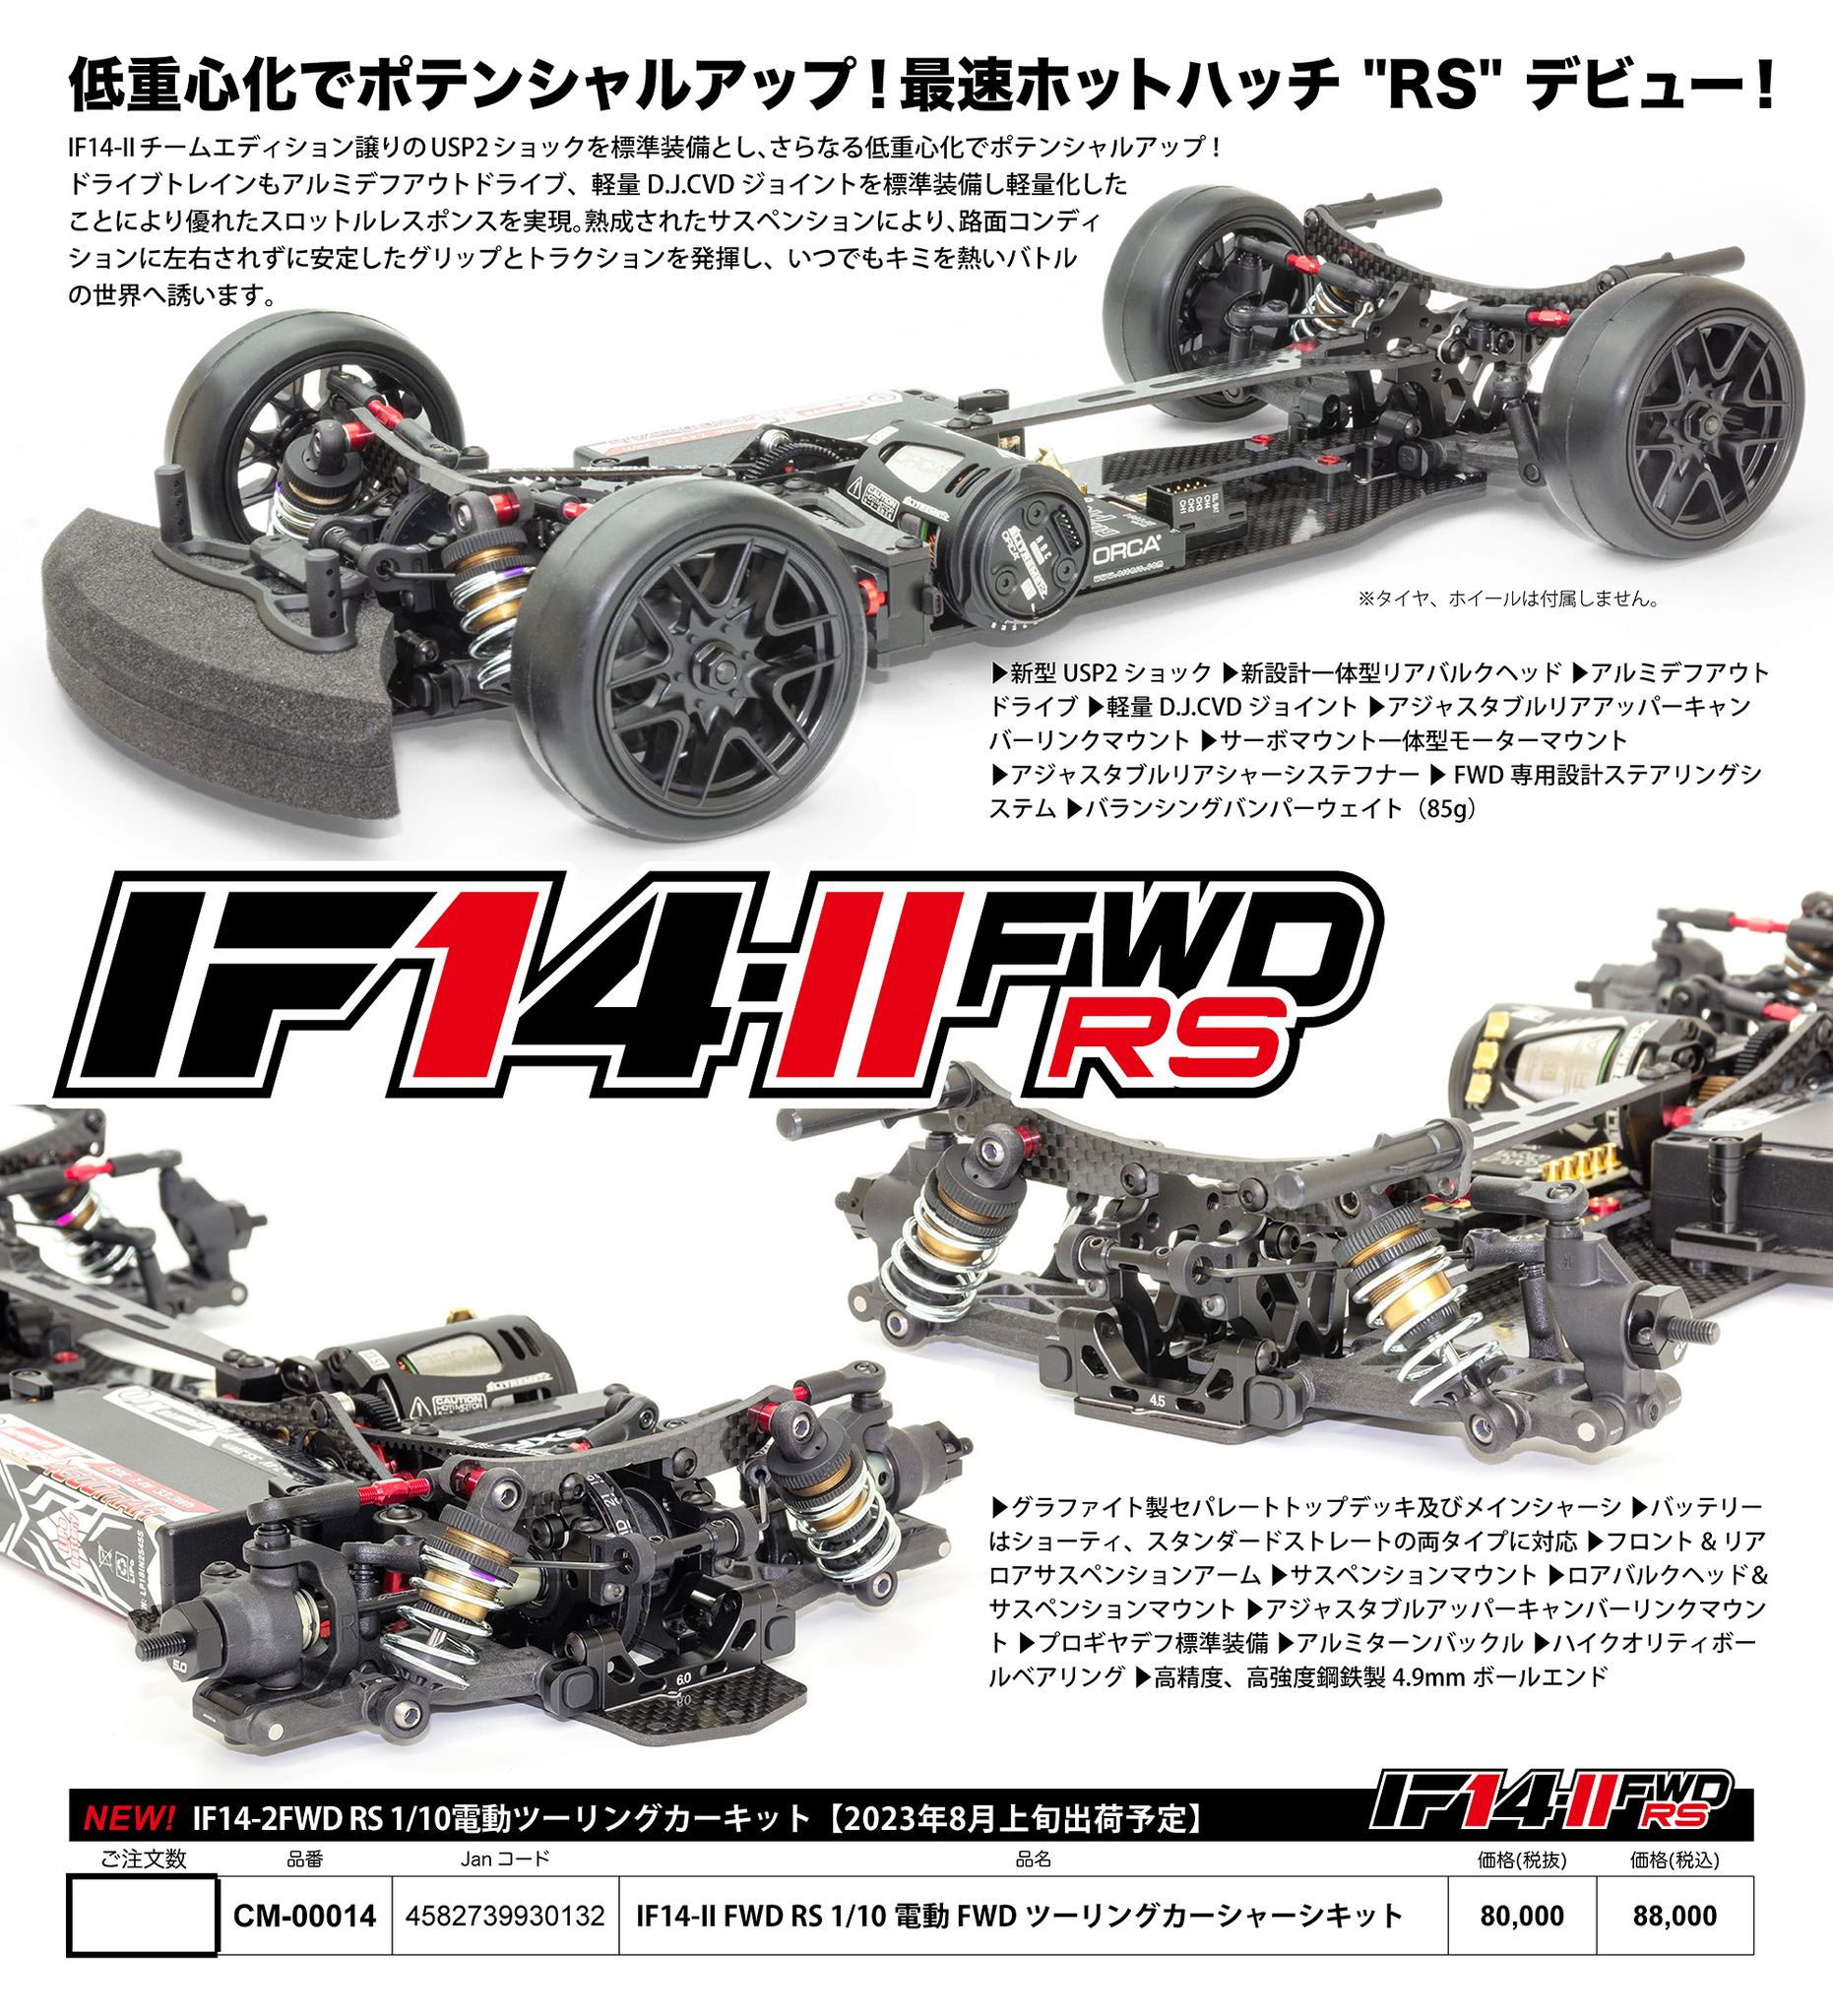 INFINITY/SMJ IF14-ll FWD RSシャーシキットを発表 - らじつう ...